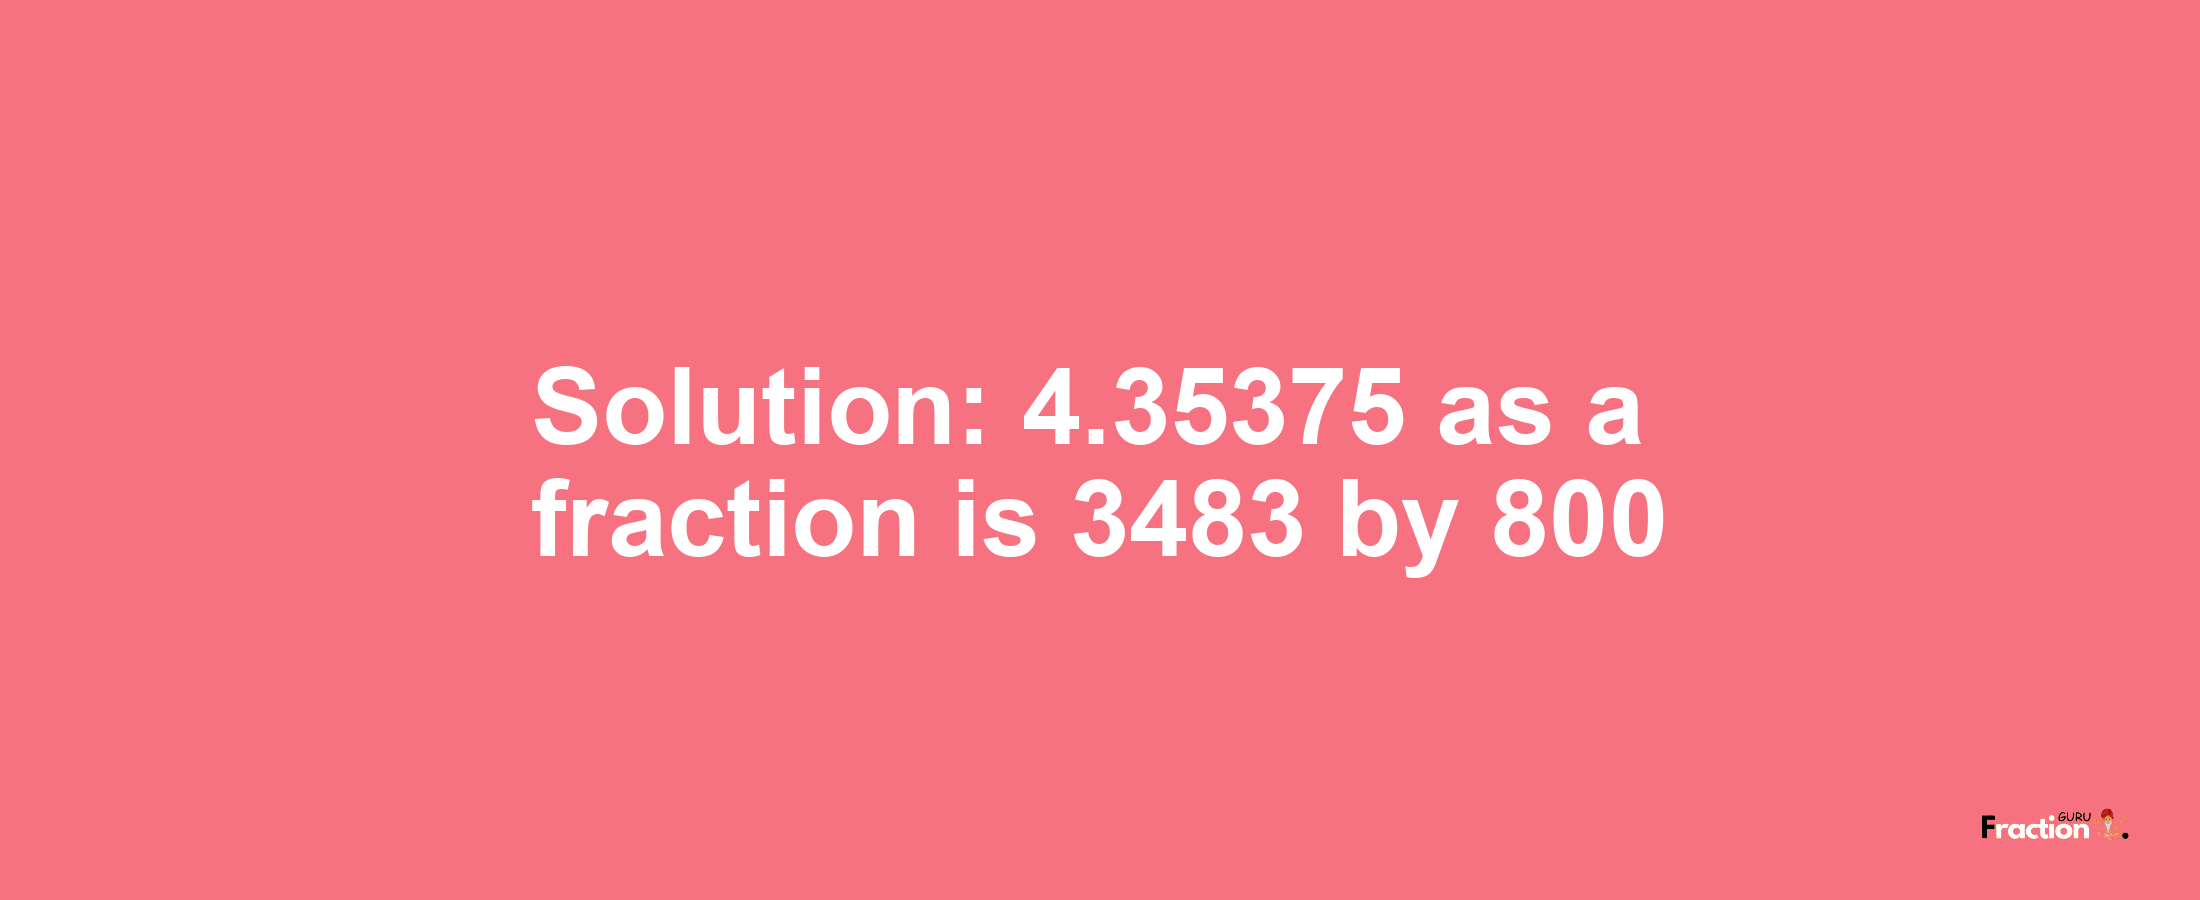 Solution:4.35375 as a fraction is 3483/800